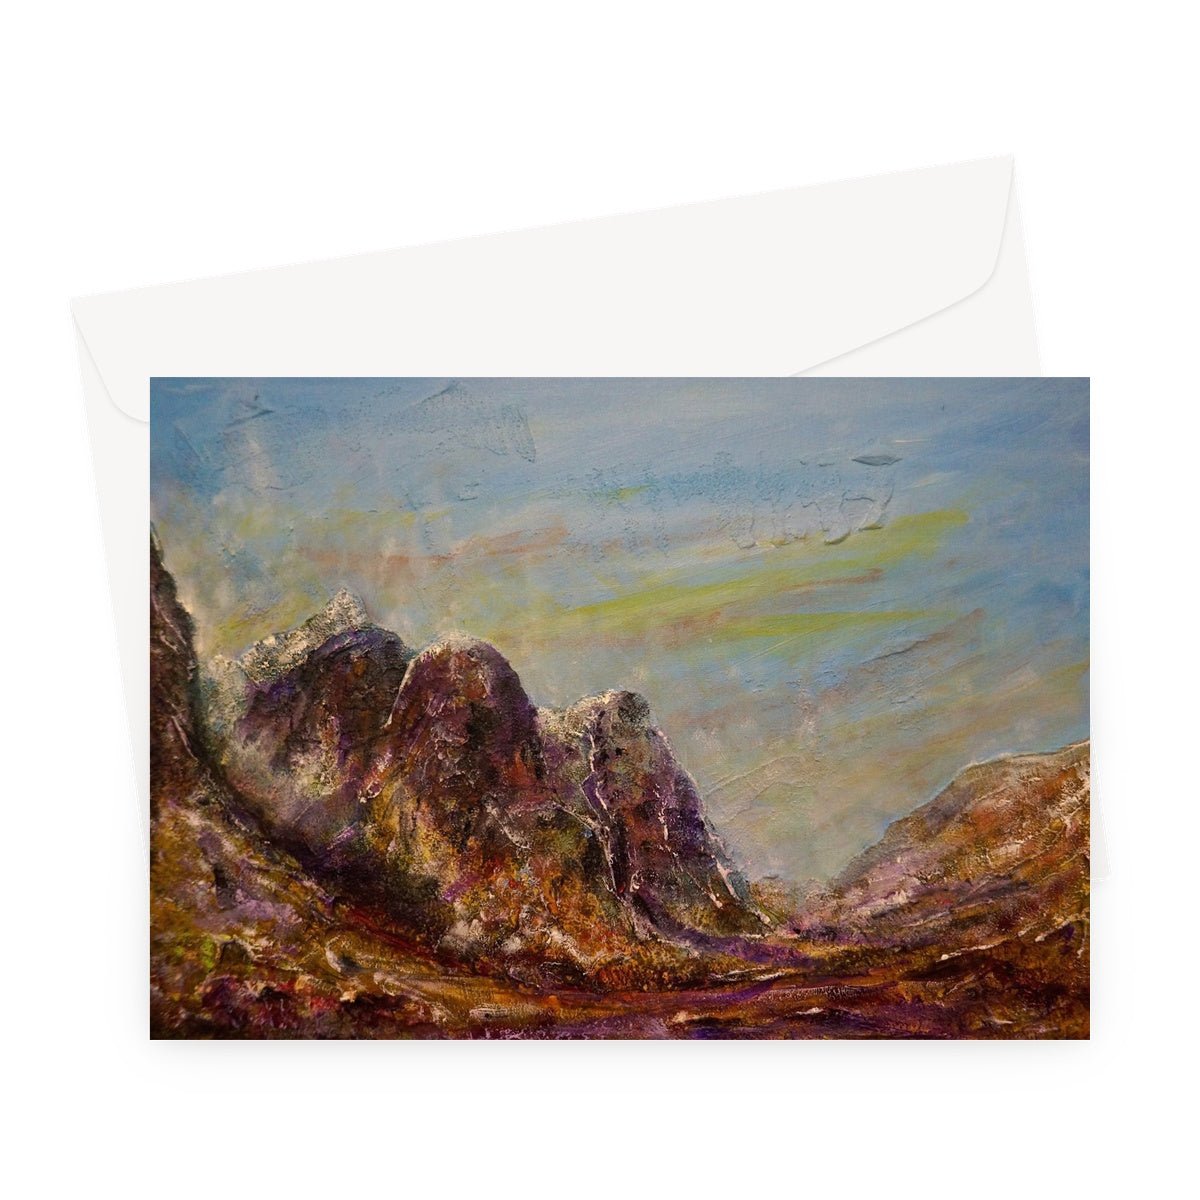 Three Sisters Glencoe Art Gifts Greeting Card-Greetings Cards-Glencoe Art Gallery-A5 Landscape-10 Cards-Paintings, Prints, Homeware, Art Gifts From Scotland By Scottish Artist Kevin Hunter